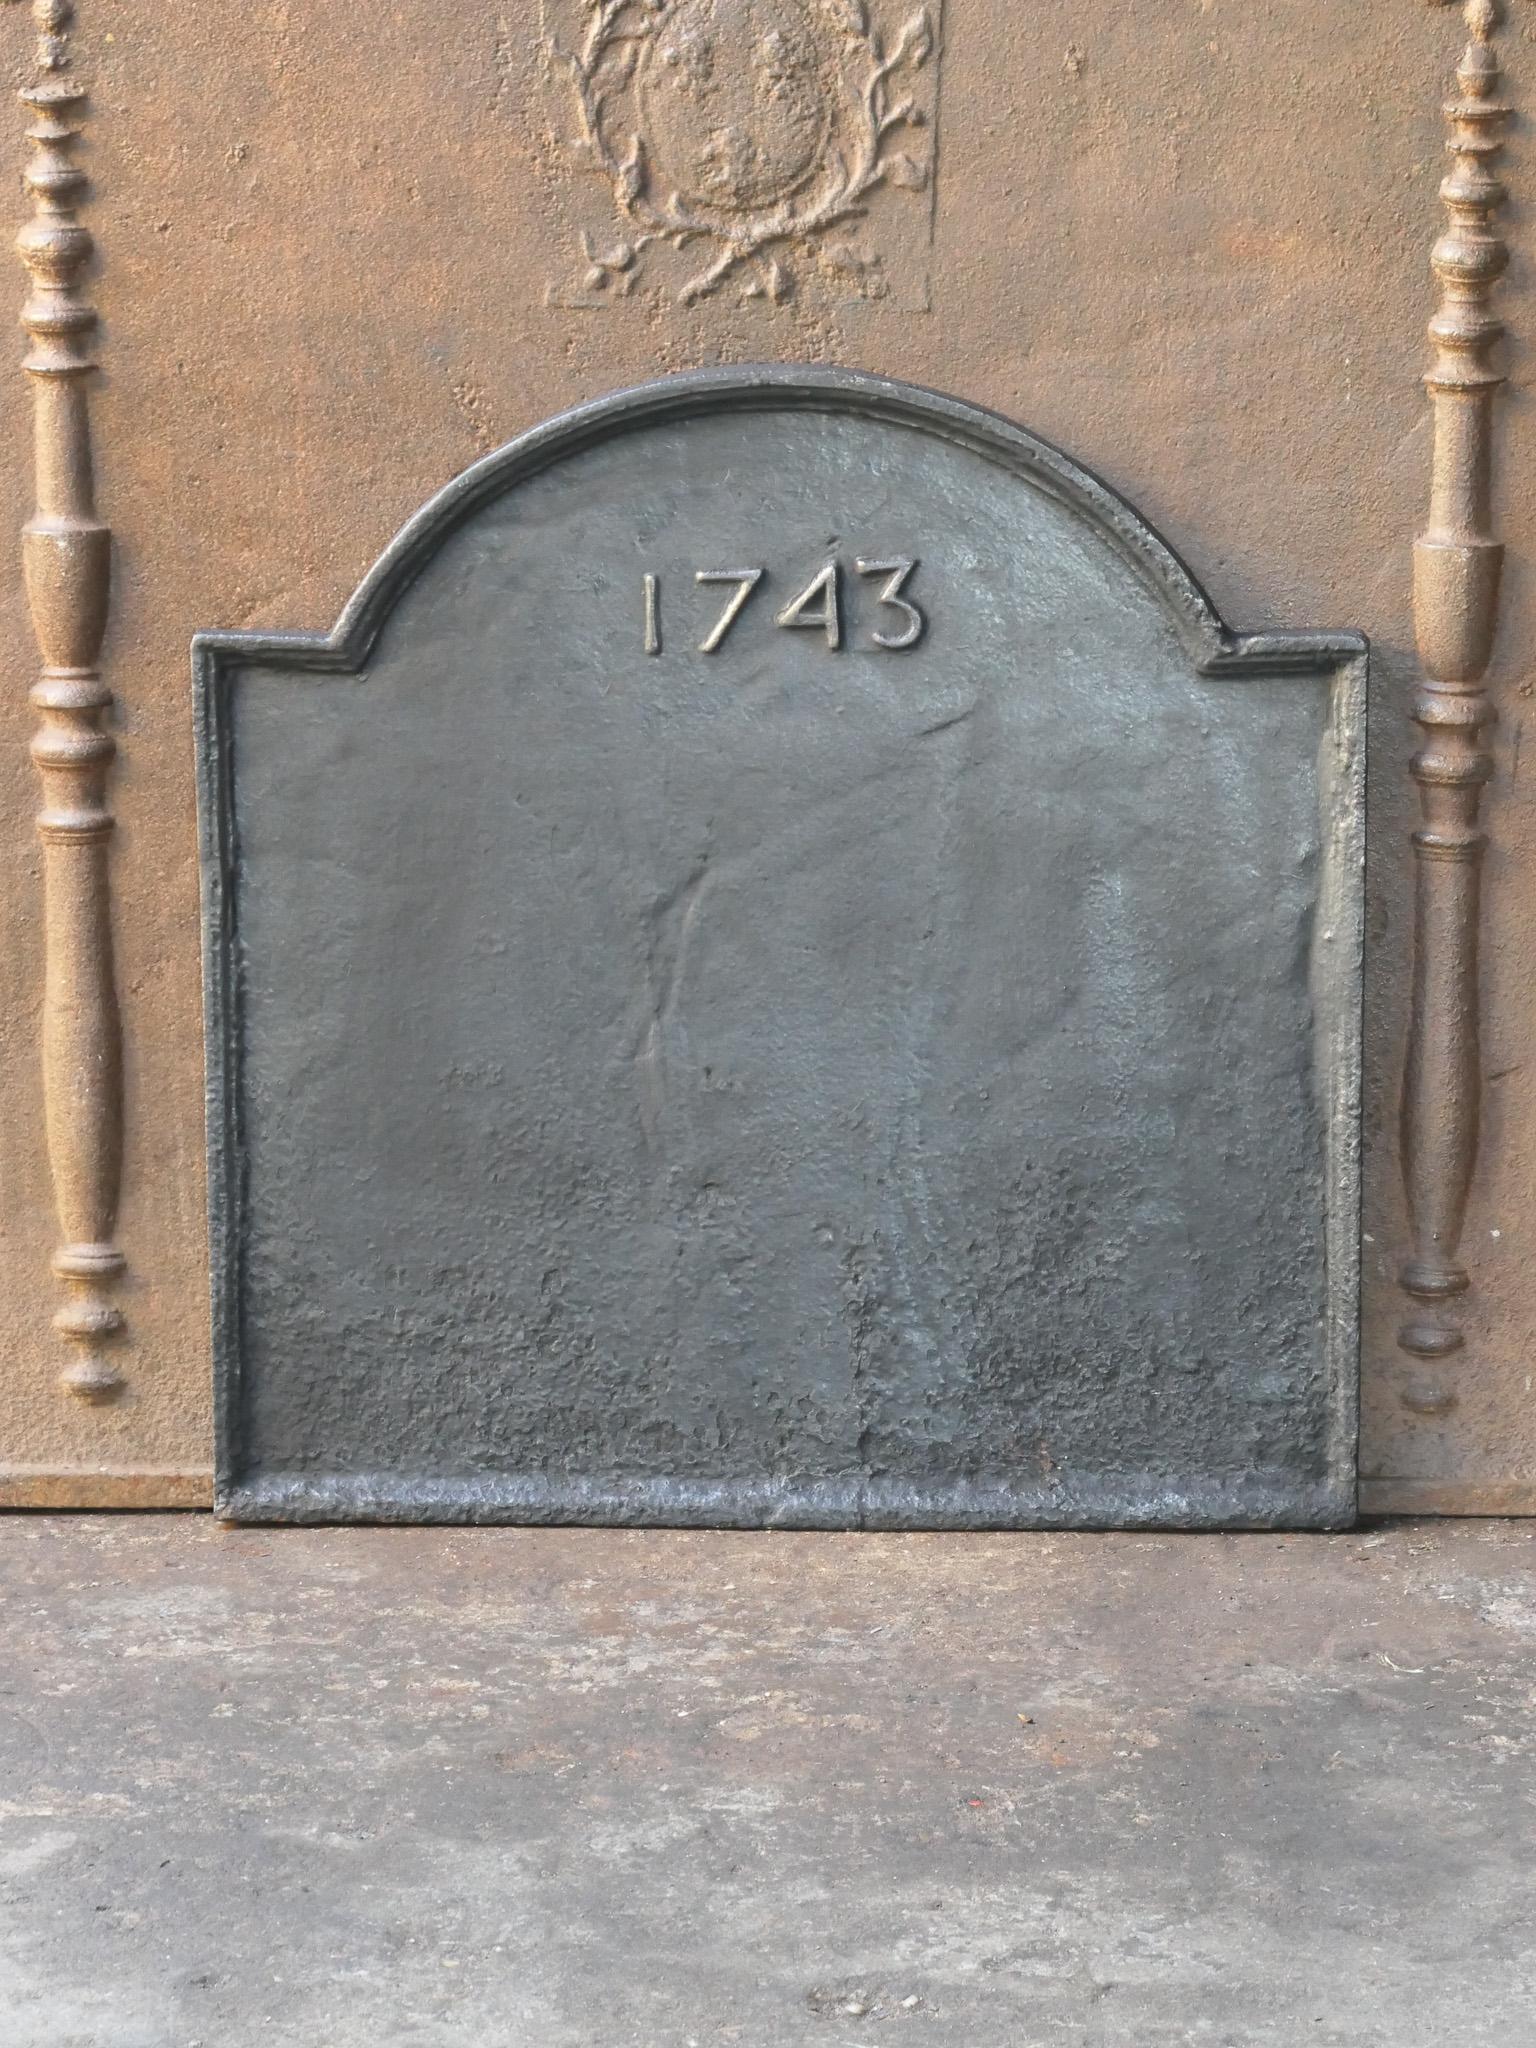 18th century French Louis XV period fireback. The date of production, 1743, is cast in the fireback. 

Made of cast iron. The fireback has a black / pewter patina.